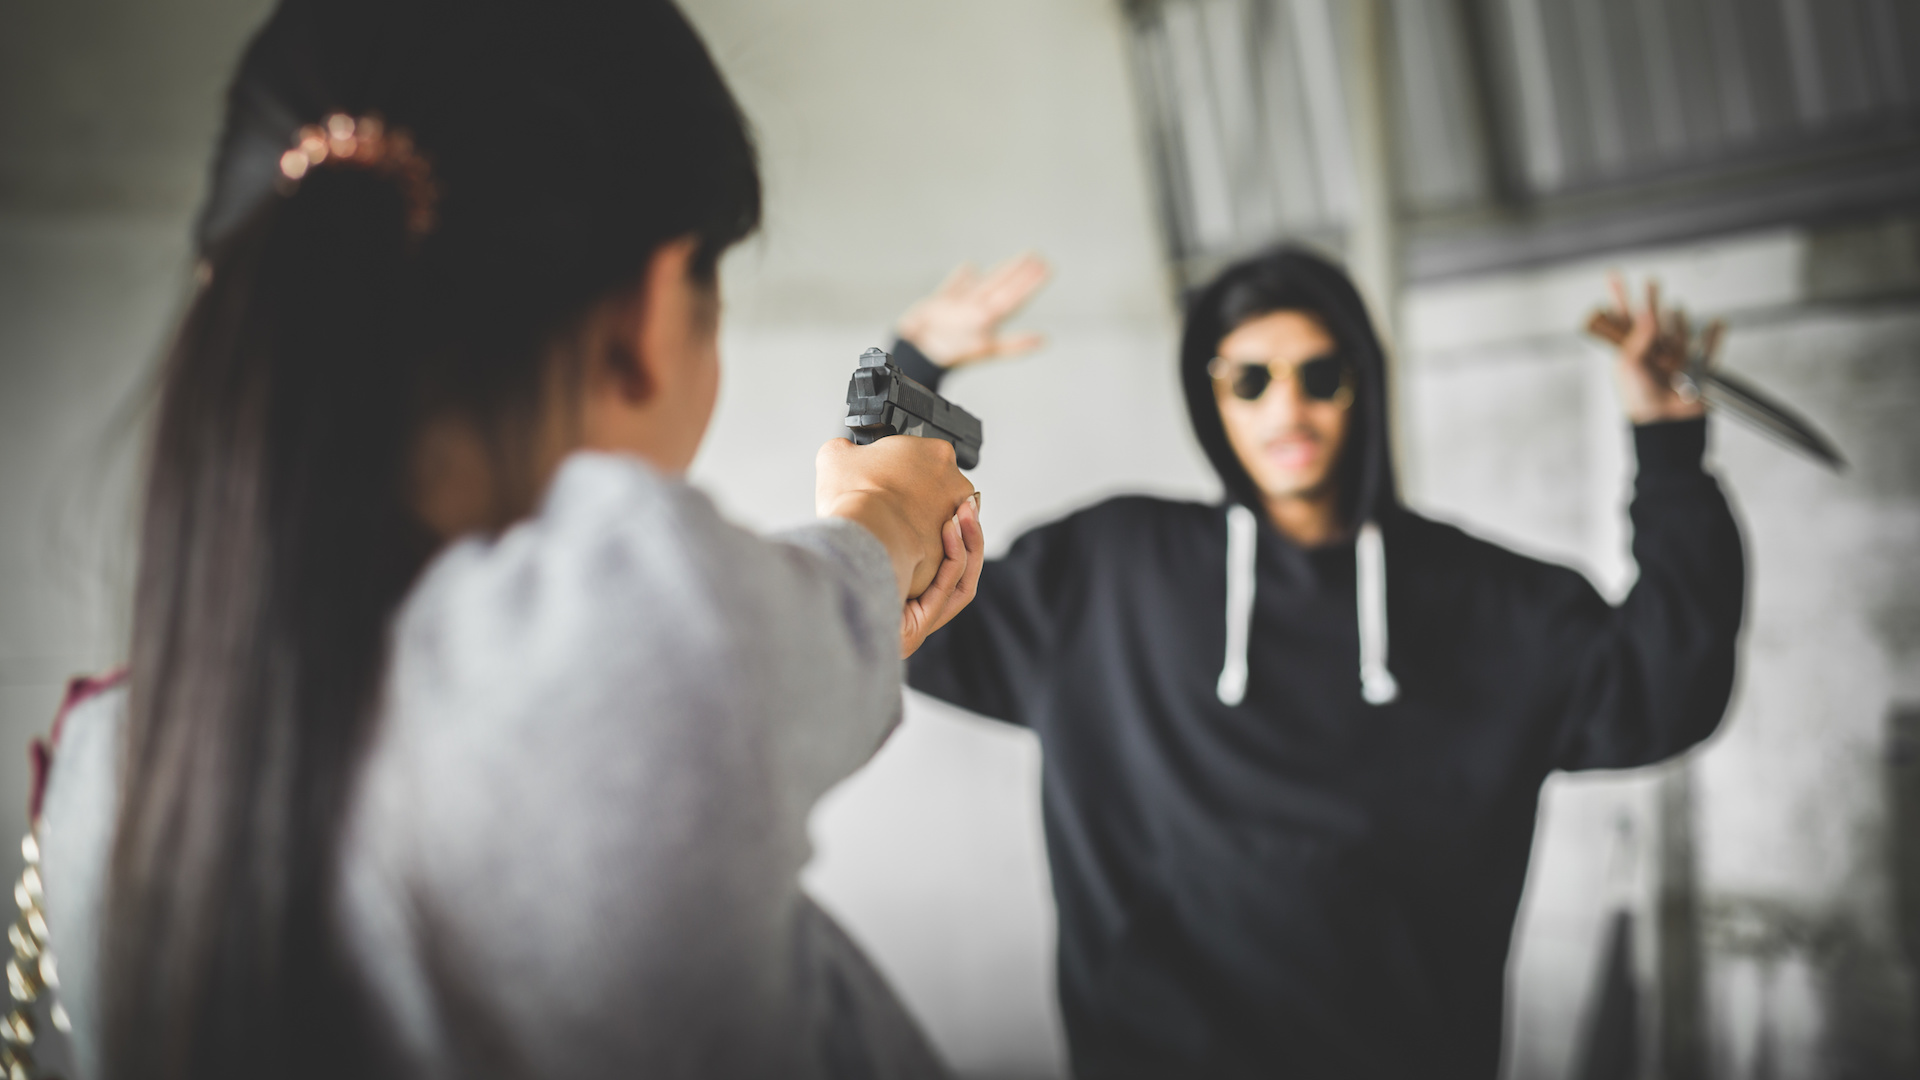 When Can You Legally Claim Self Defense In California?